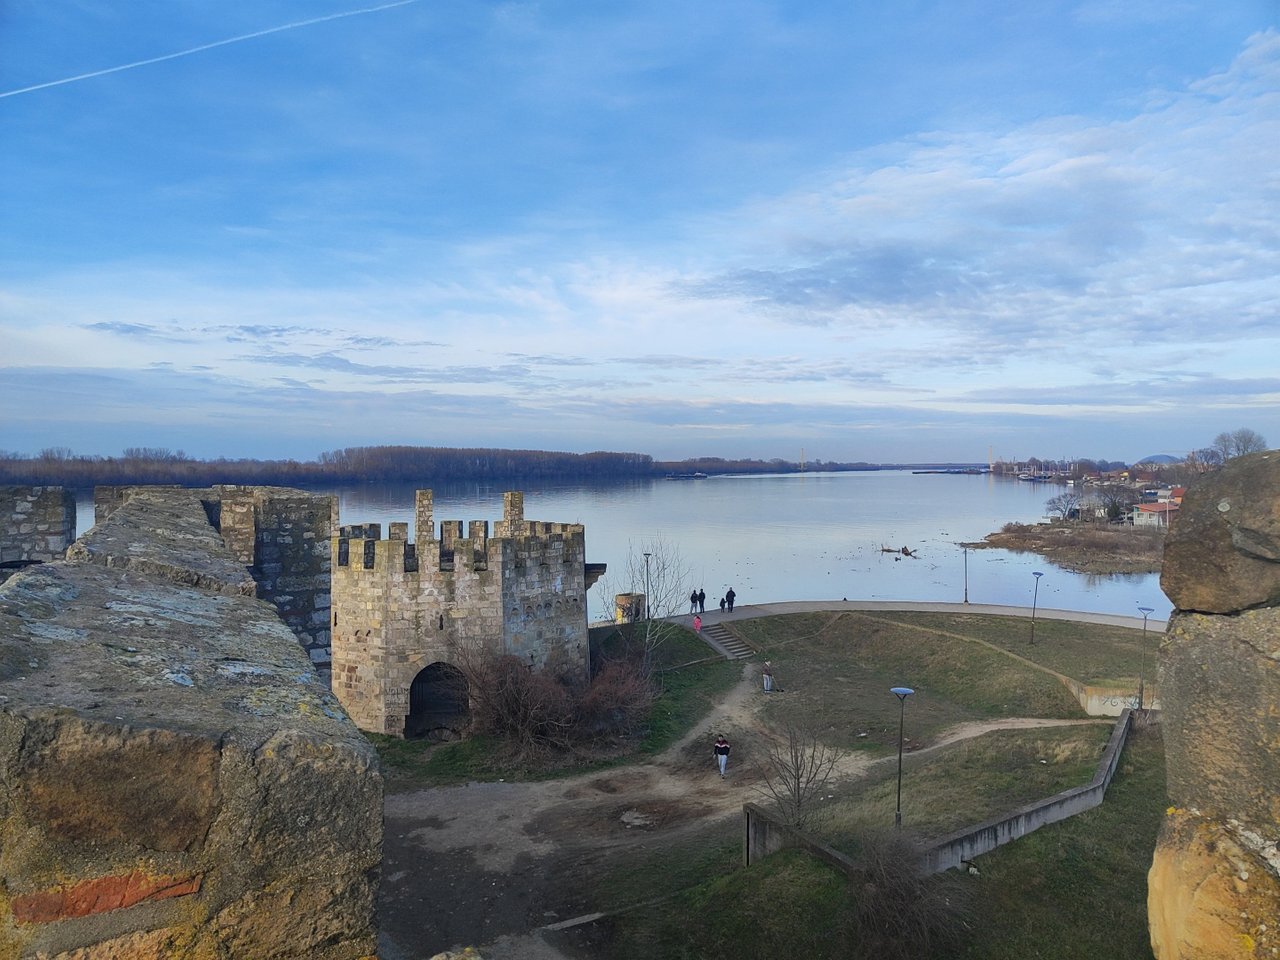 Smederevo Fortress Last Serbian Medieval Capital City - My Forever Travel